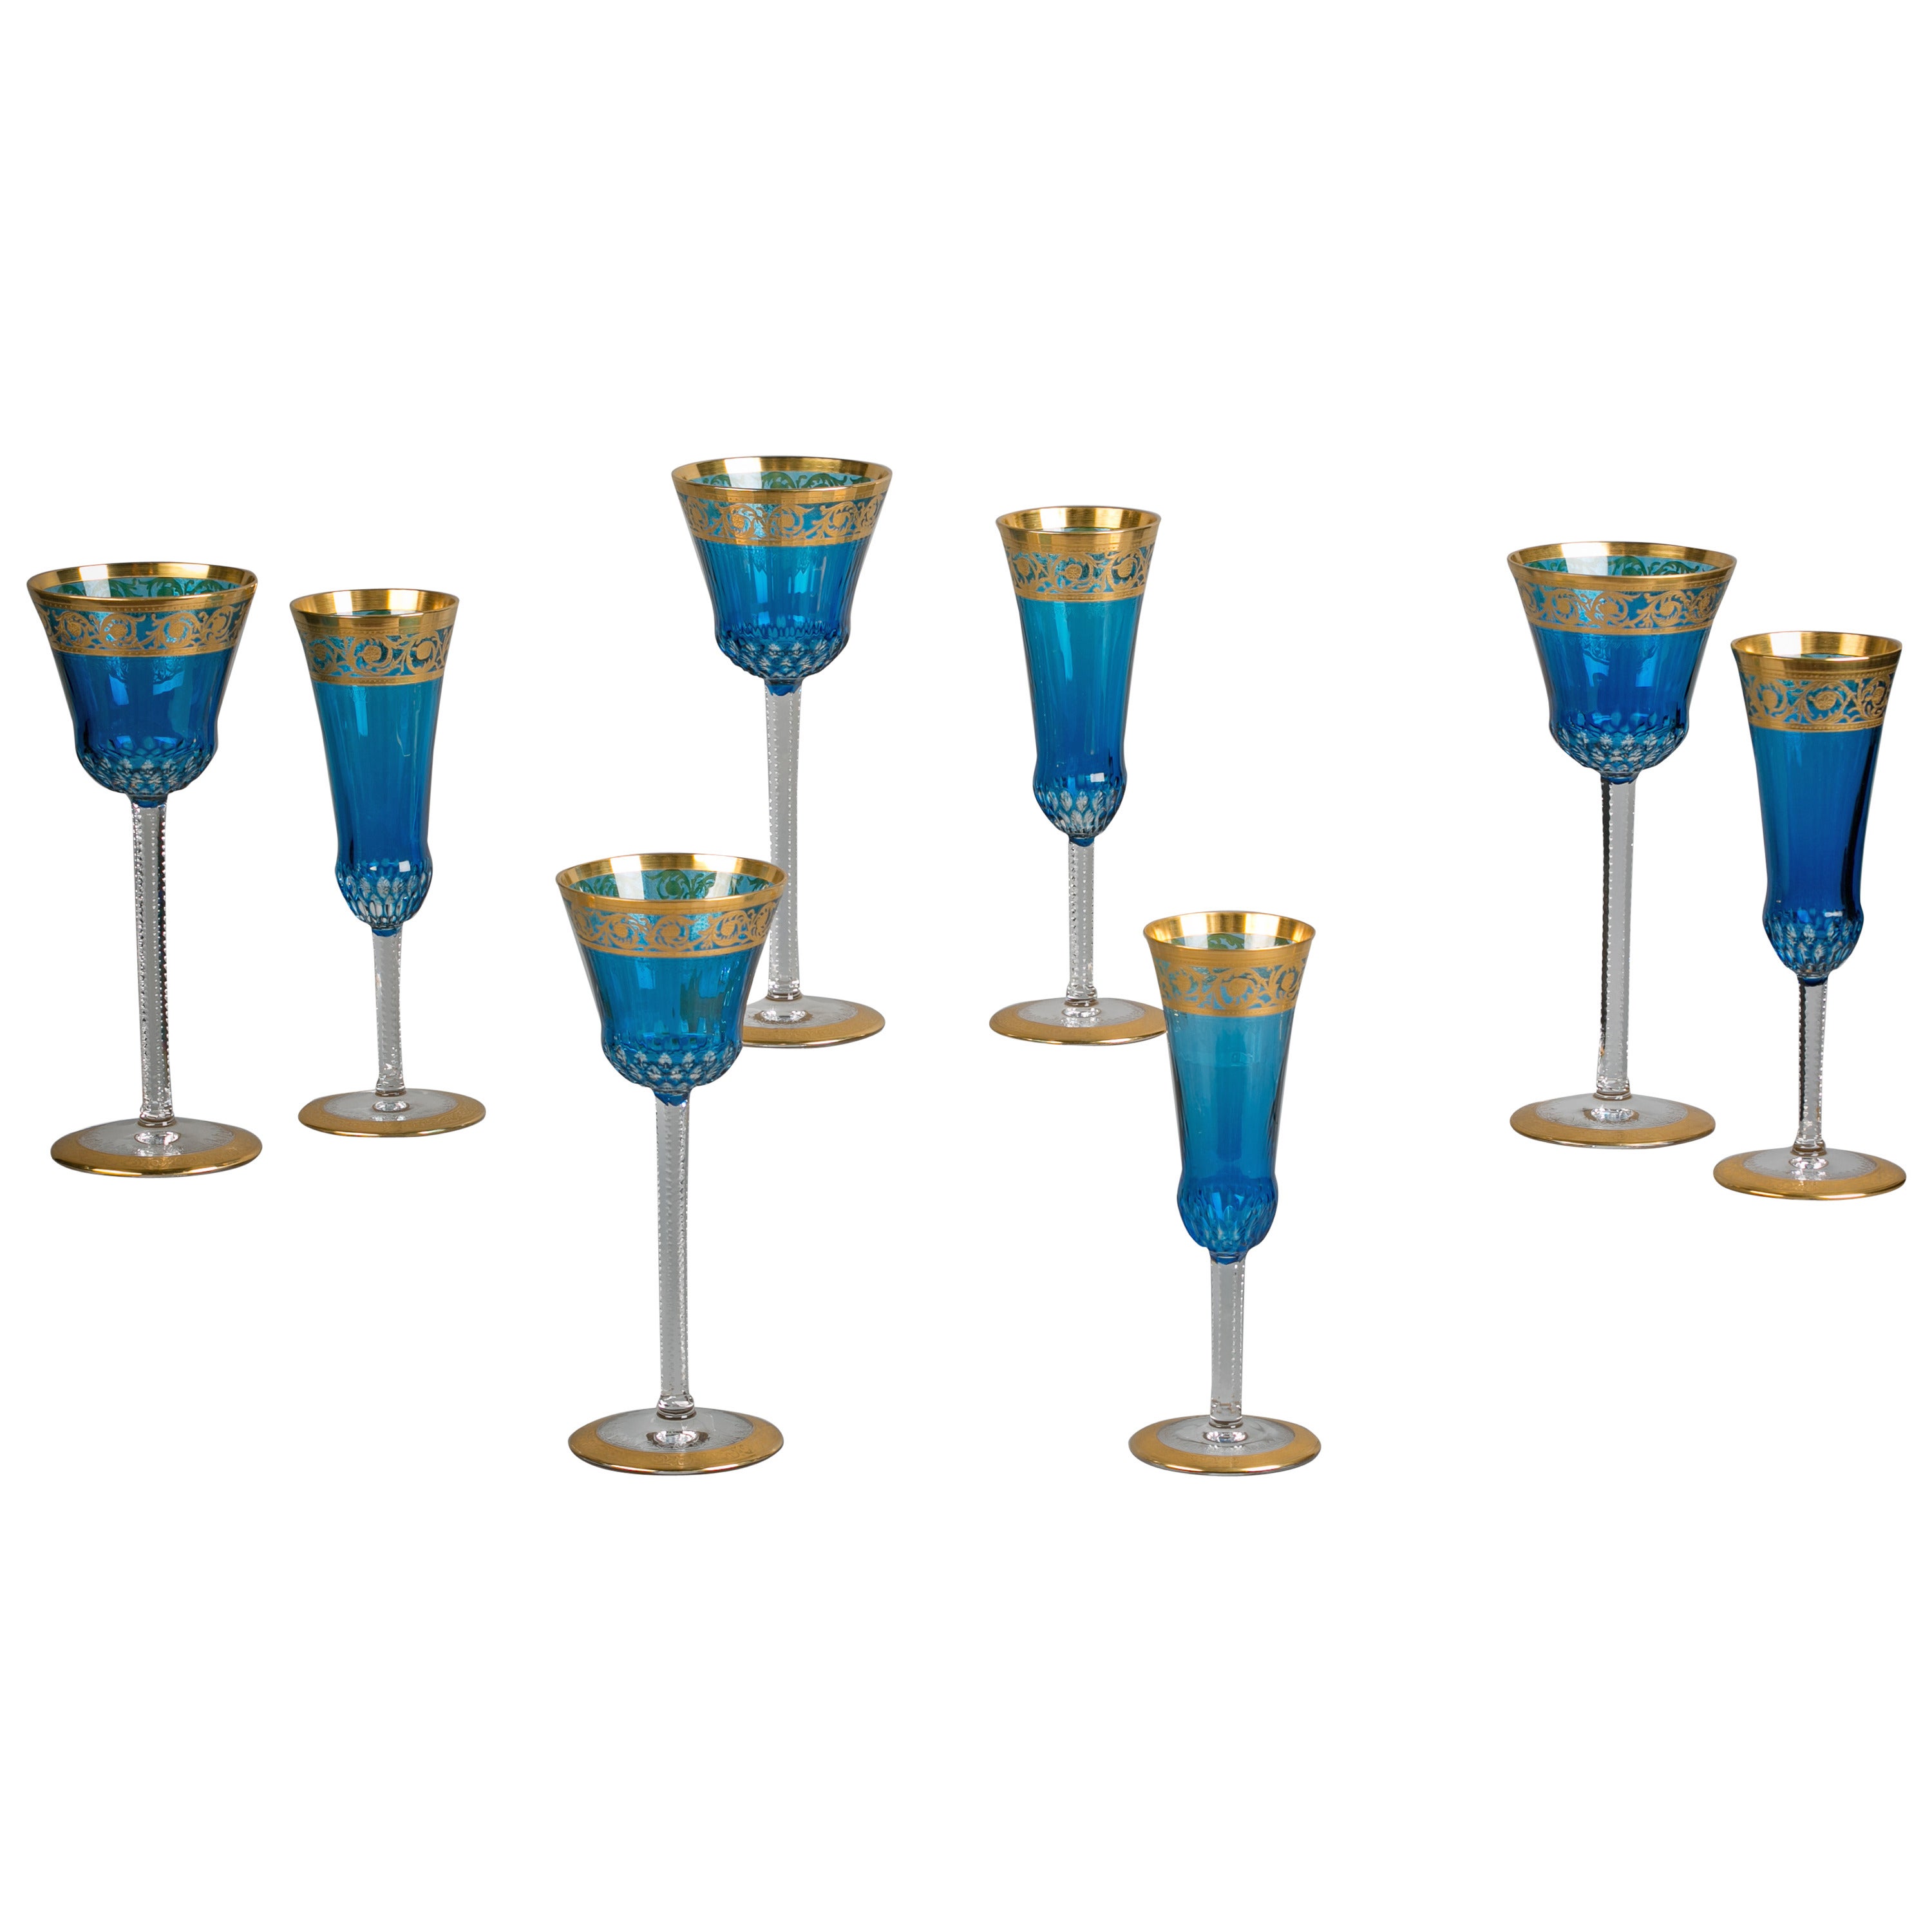 Set of 30 Wine and Champagne Glasses with French Thistle Pattern, circa 1940